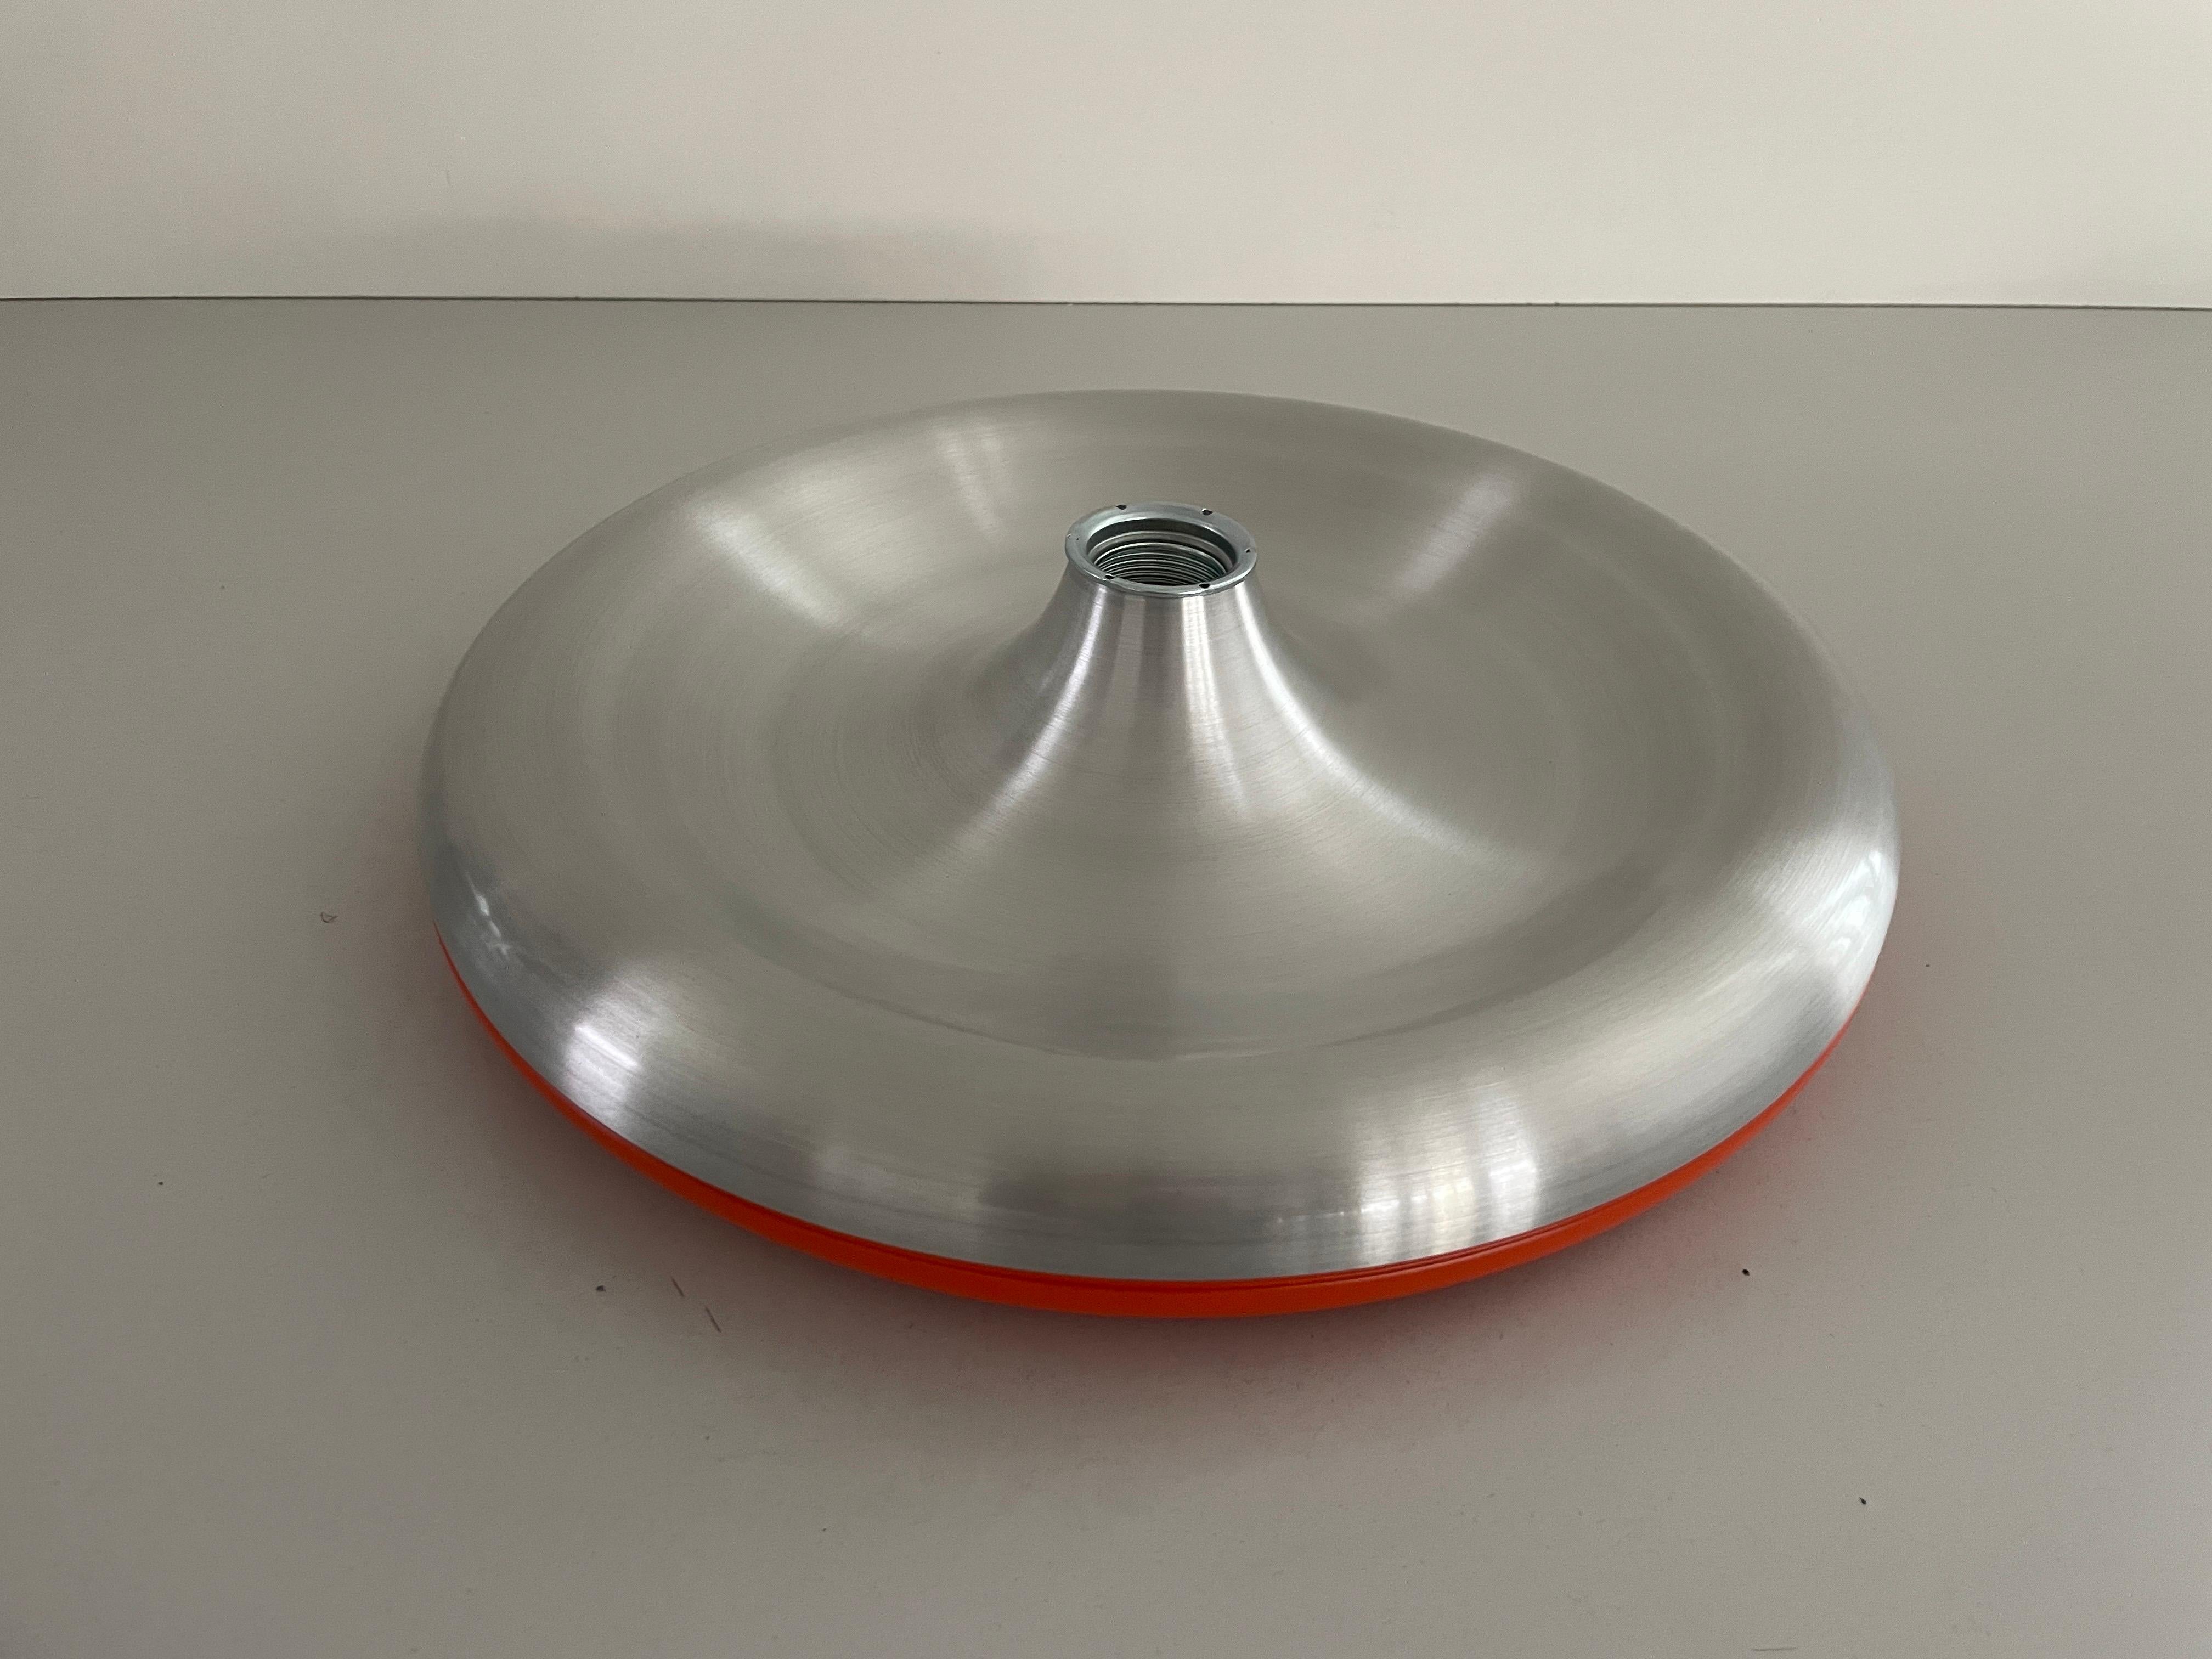 Metallic Grey and Orange Space Age Flush Mount Ceiling Lamp, 1970s, Germany In Excellent Condition For Sale In Hagenbach, DE